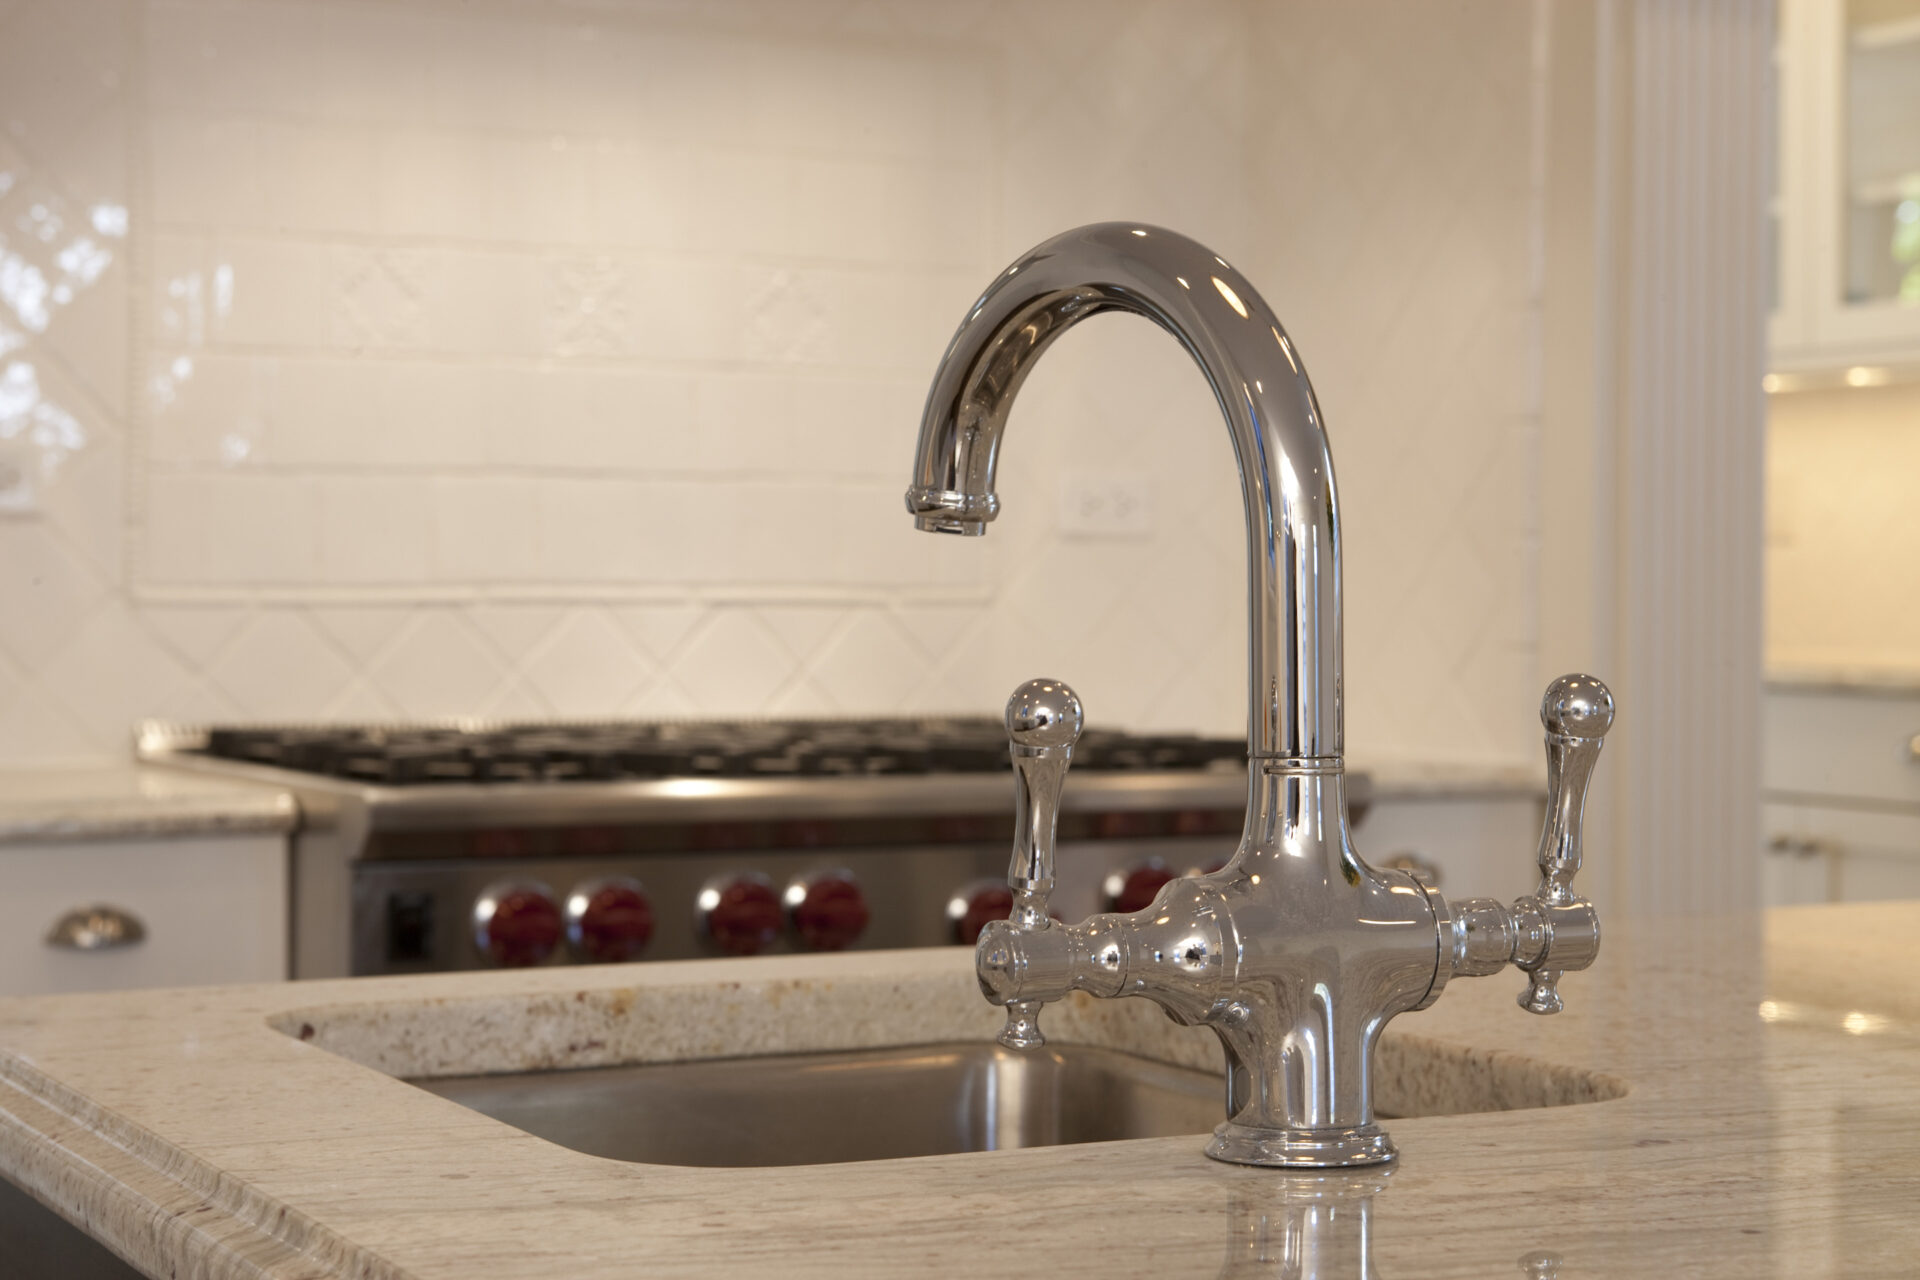 Stainless faucet in kitchen space